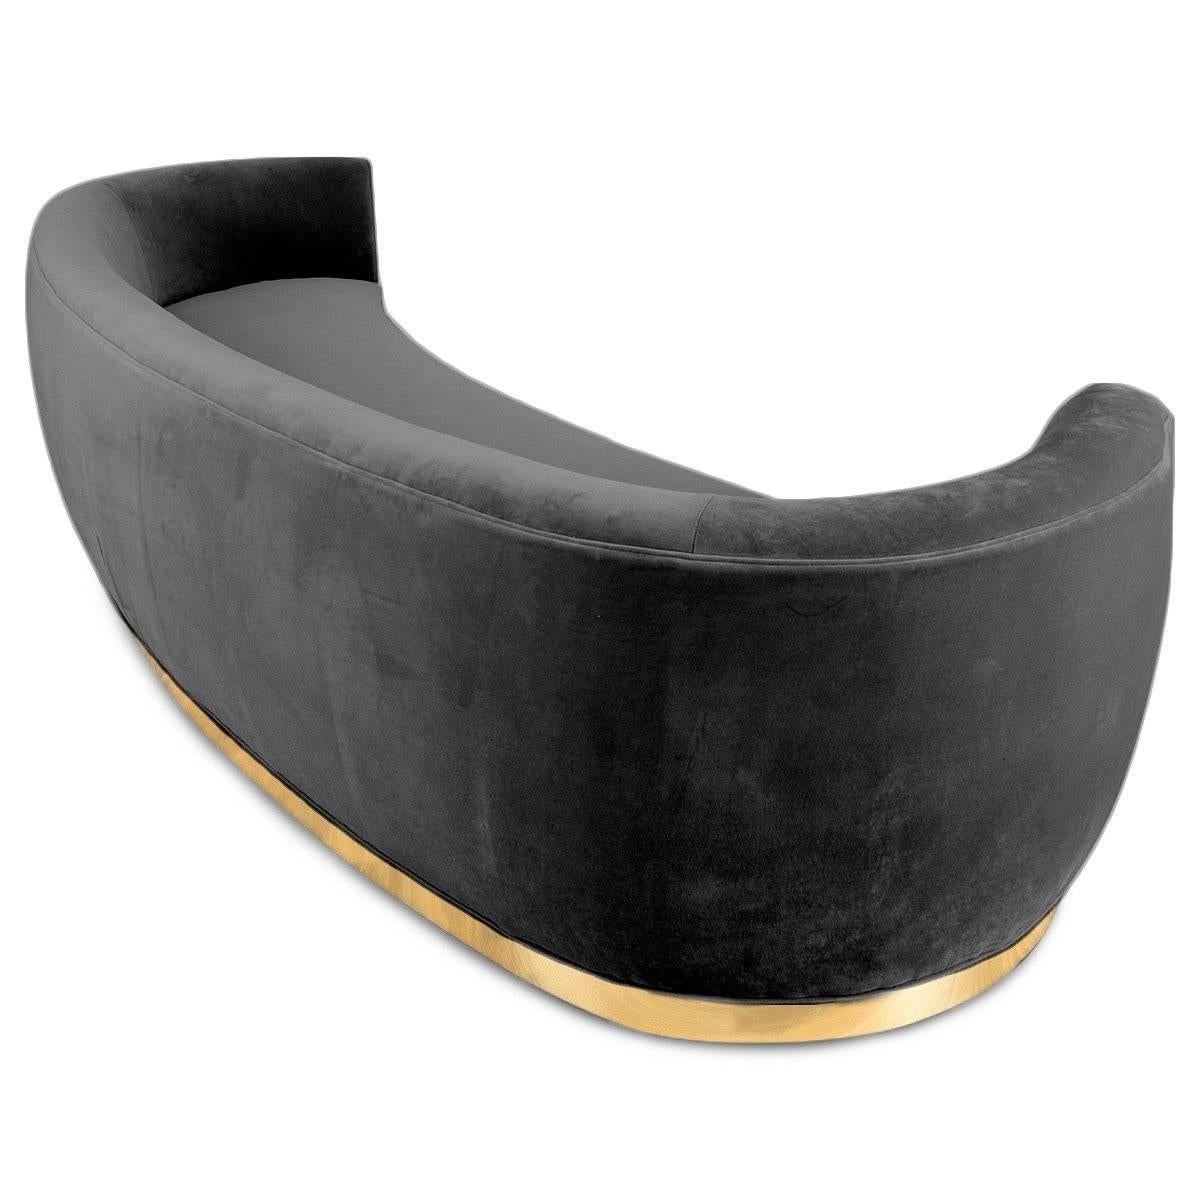 Art Deco Style Curved Sofa in Velvet Upholstery with Brass Toe-kick Base 10 foot For Sale 3